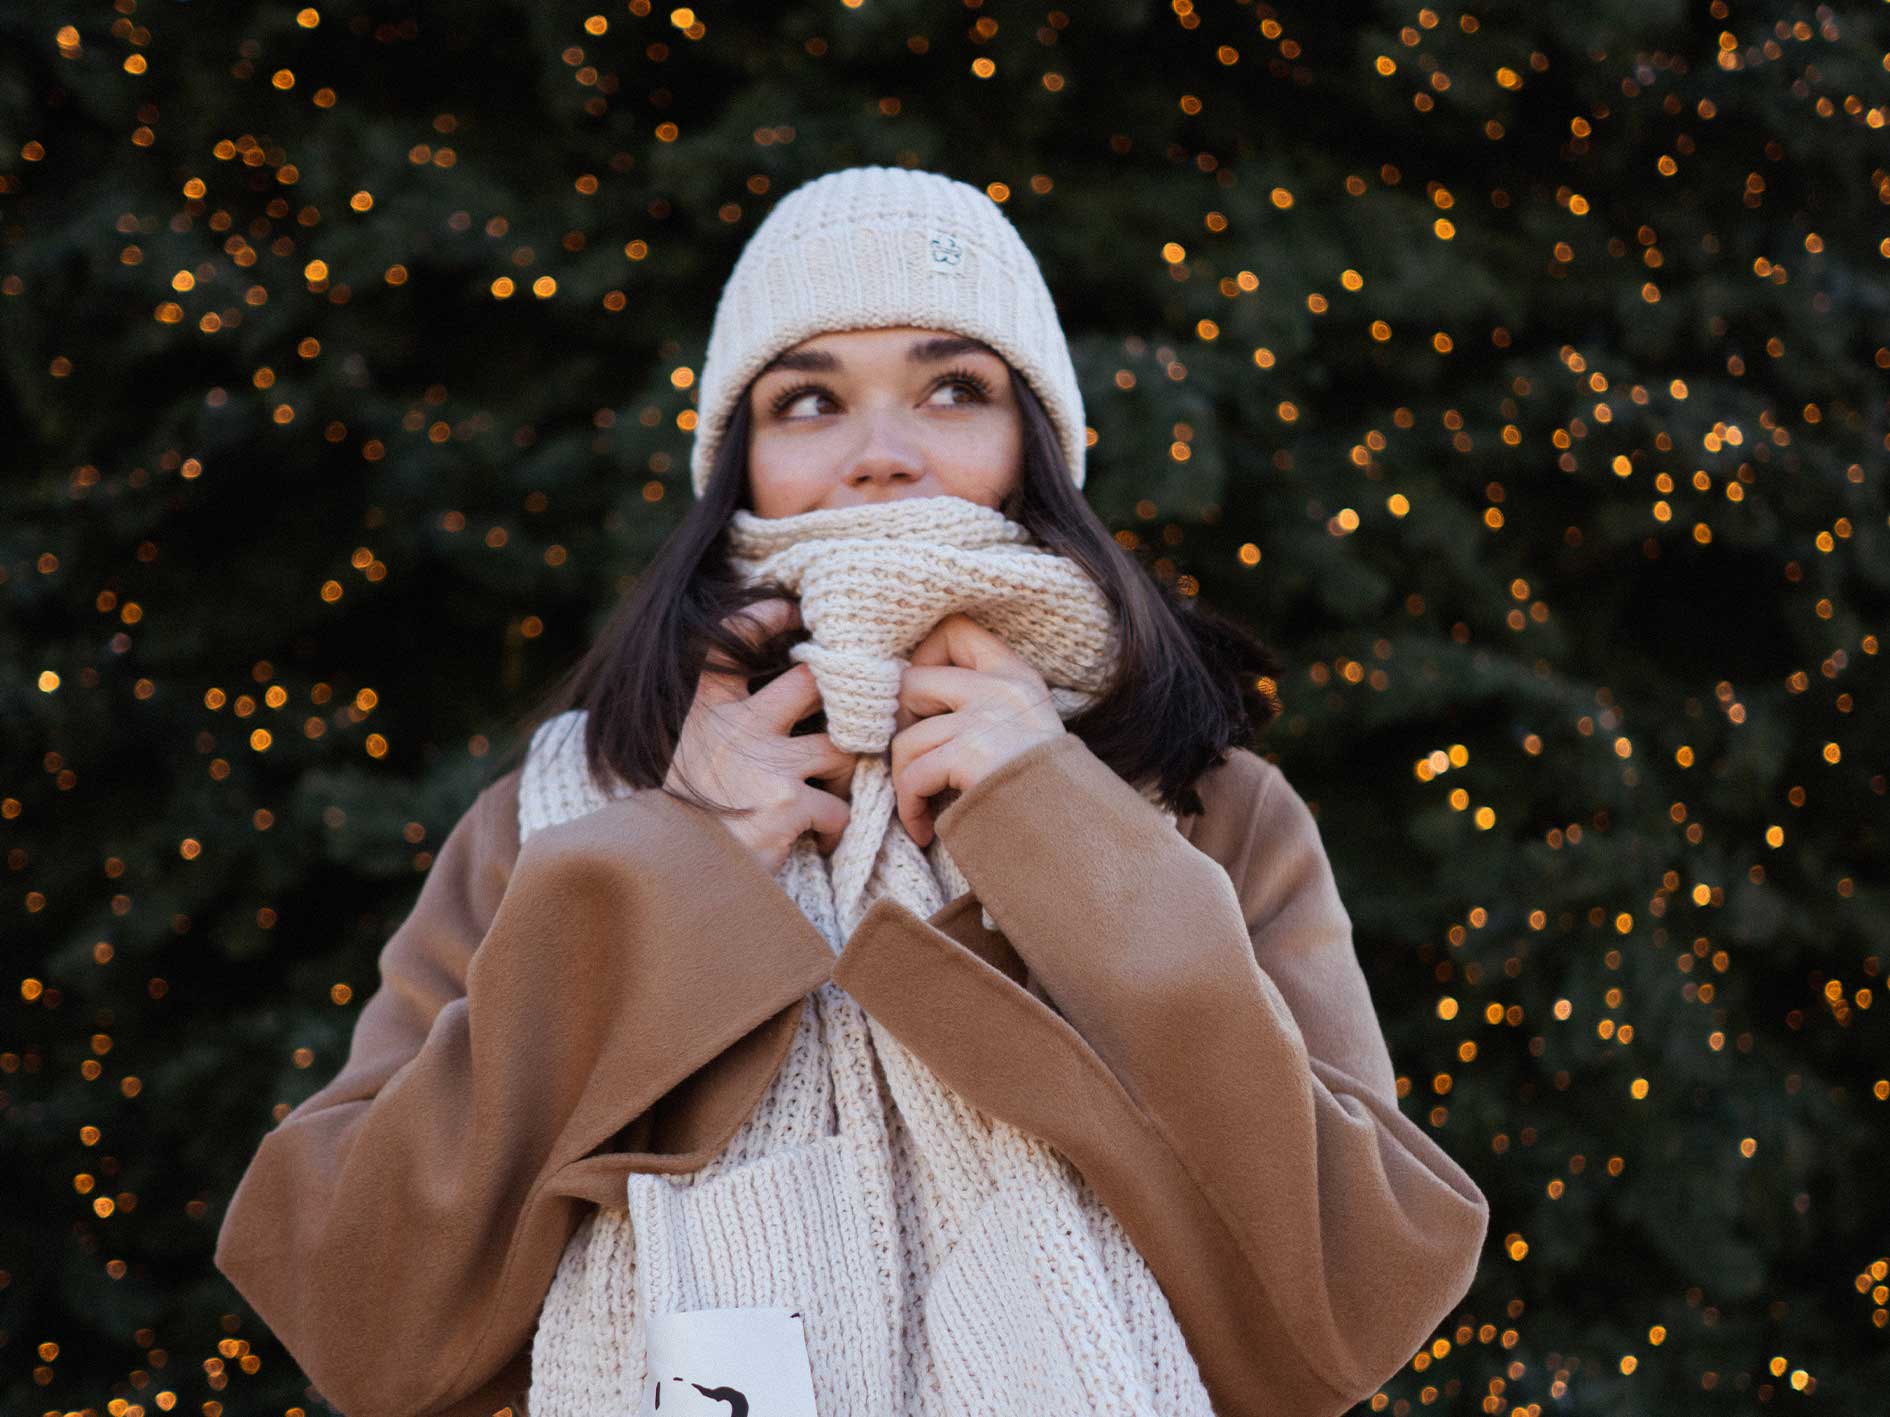 How brands can activate influencer marketing for the holidays